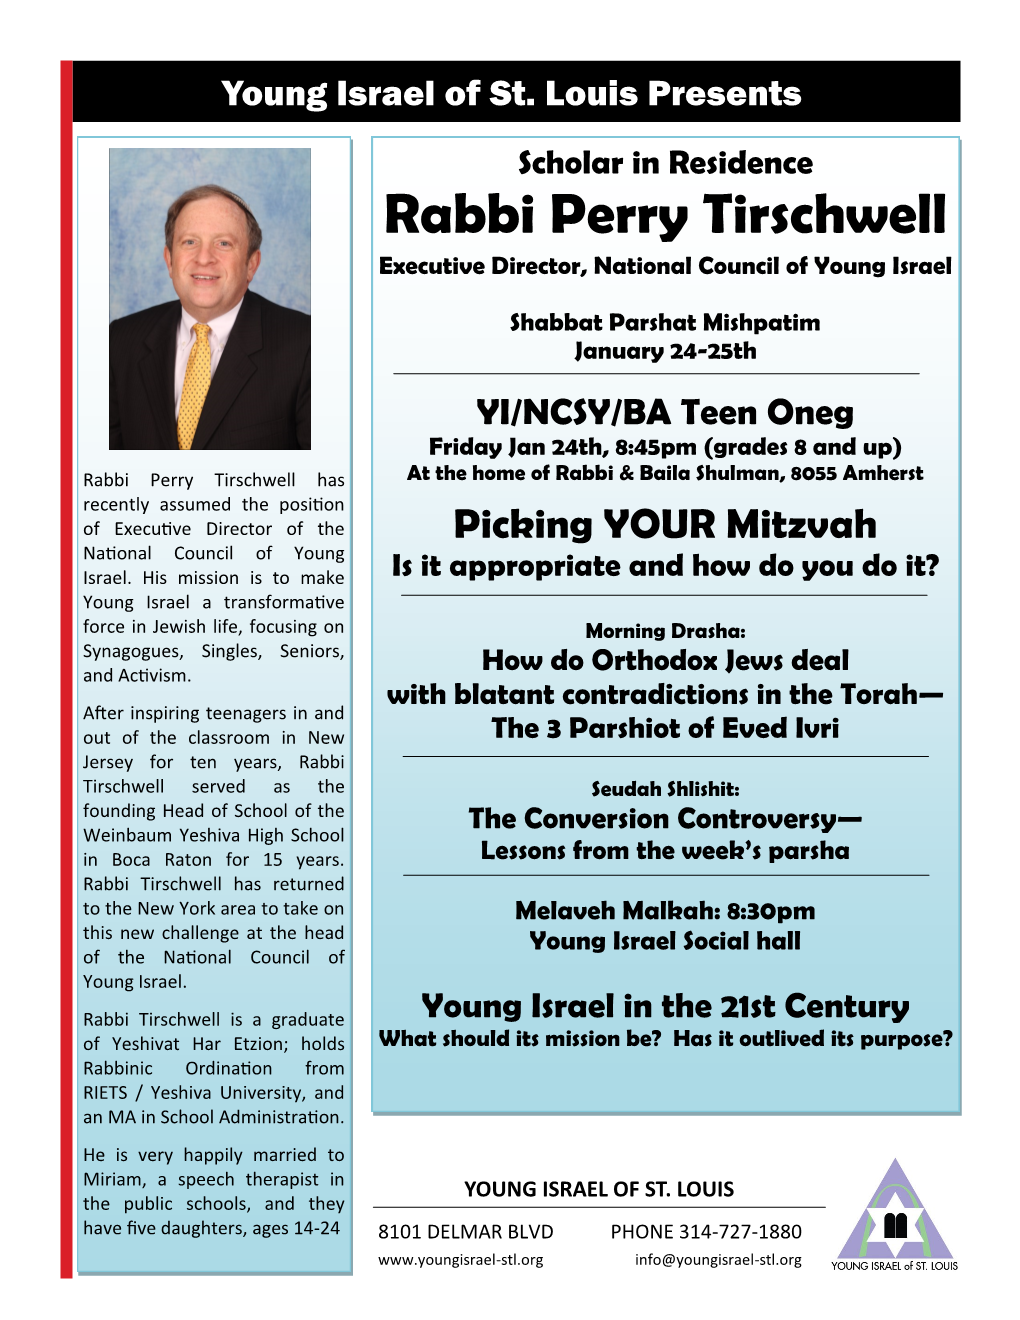 Rabbi Perry Tirschwell Executive Director, National Council of Young Israel